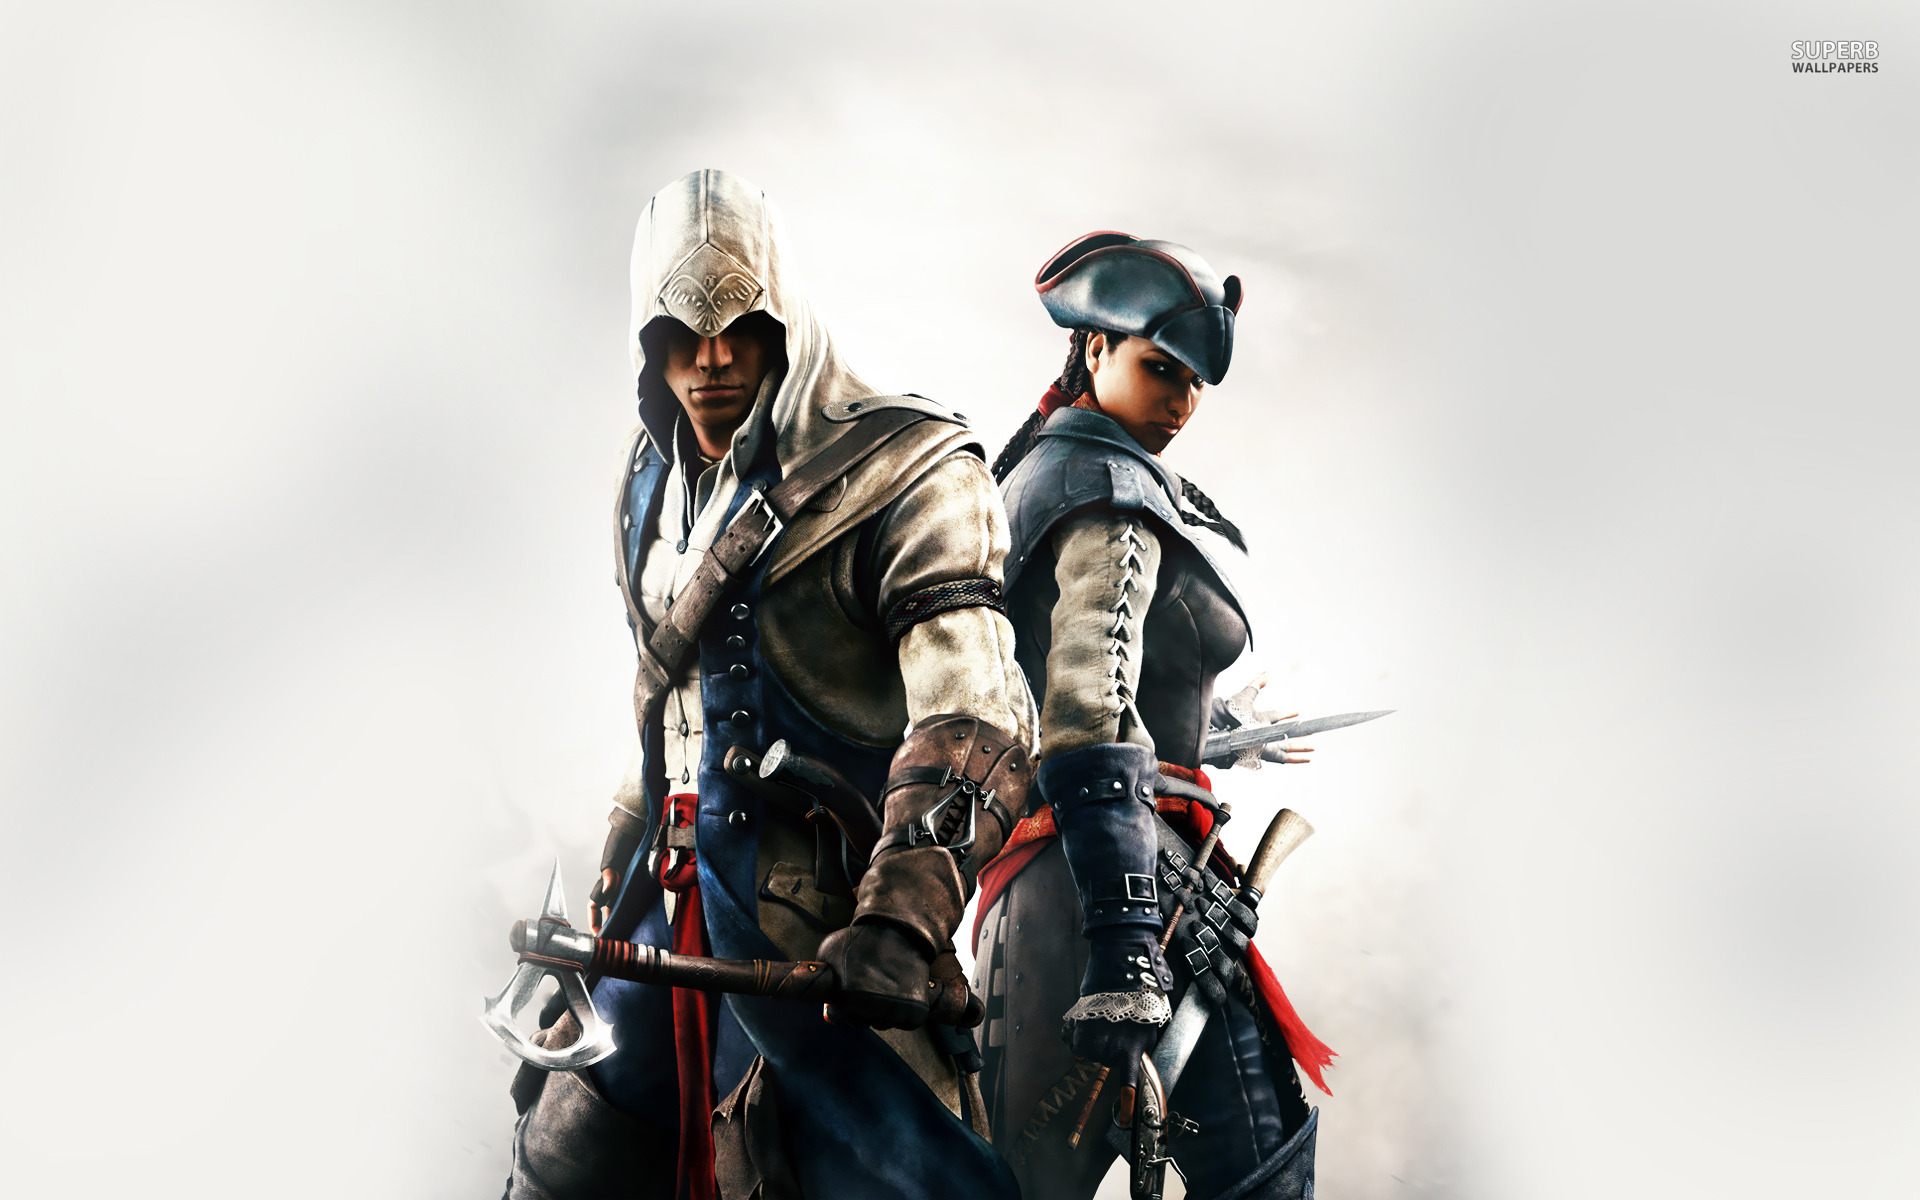 Assassin's Creed III wallpaper - Game wallpapers - #21068